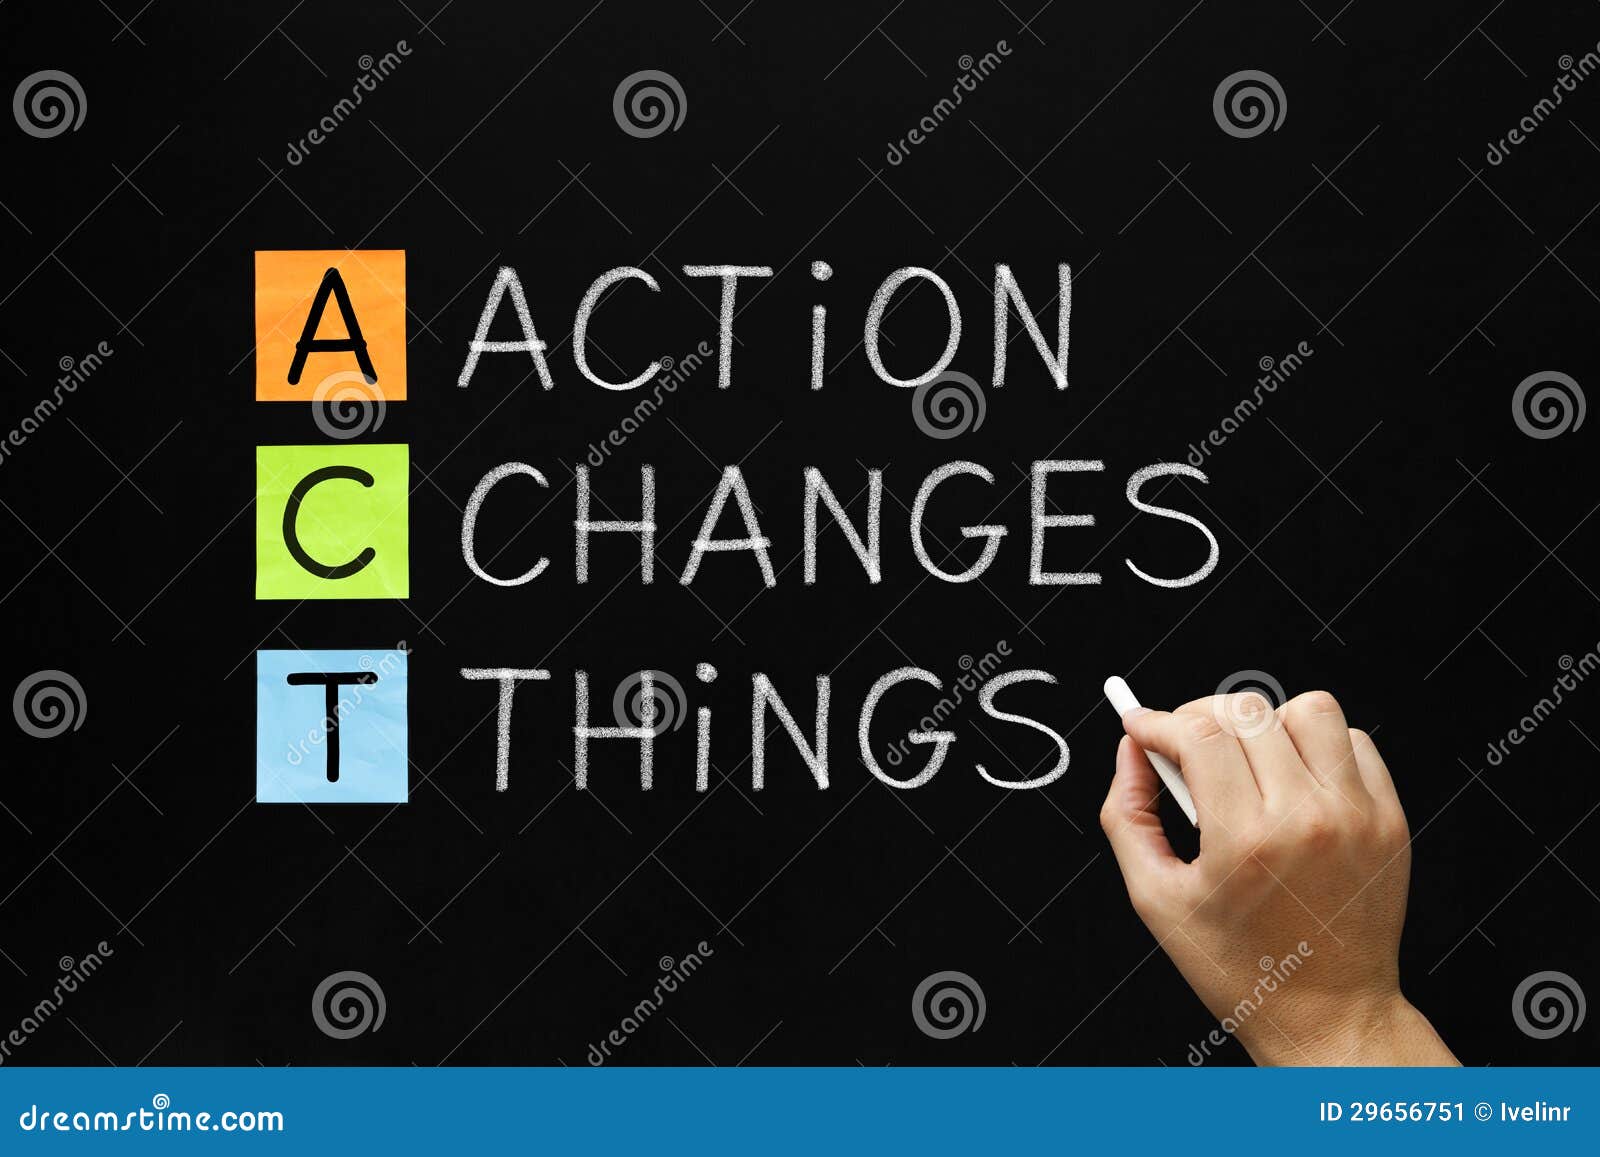 action changes things acronym